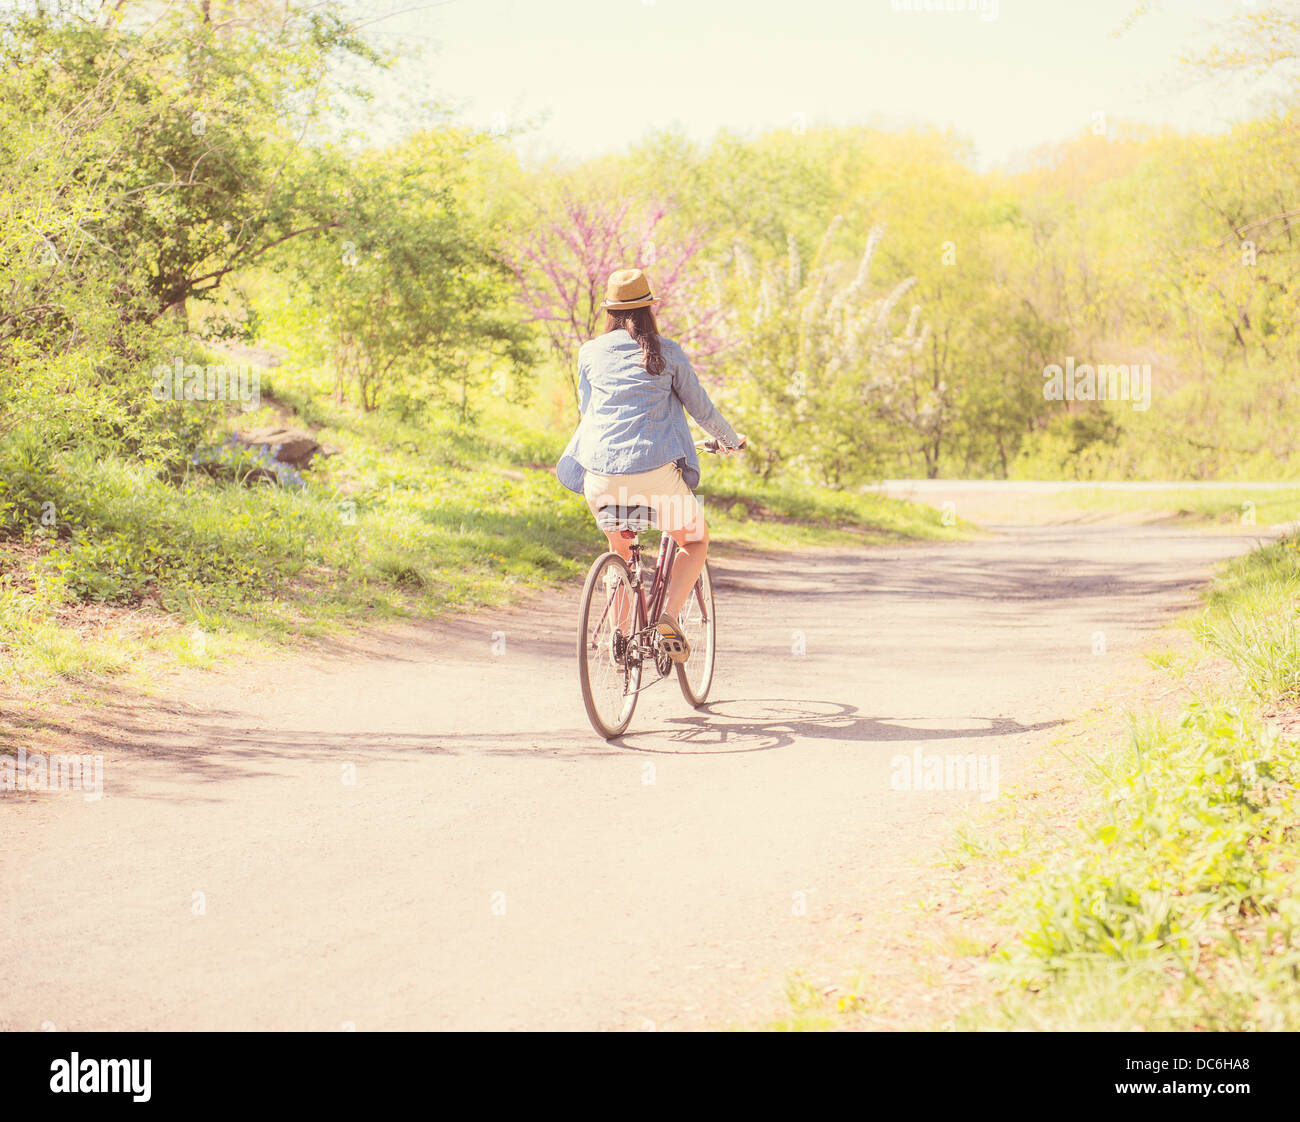 USA, New York State, New York, Central Park, Mid adult woman riding bicycle Banque D'Images